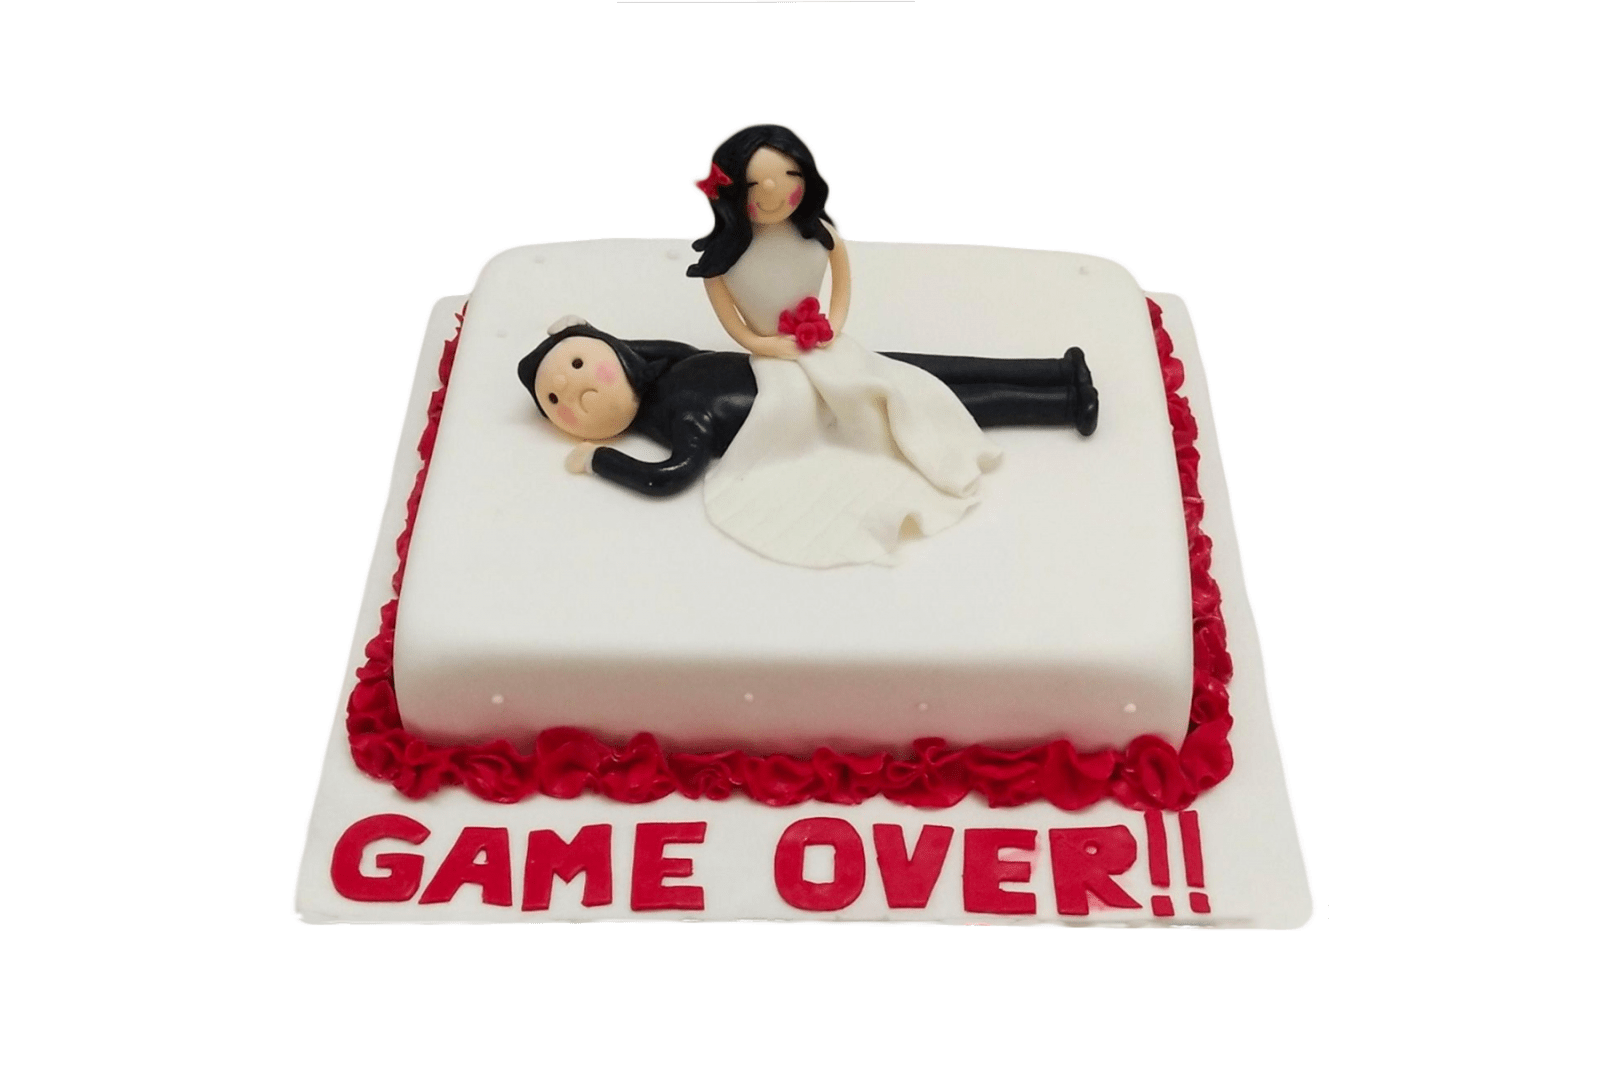 Girl on Top Theme Naughty Cake Delivery in Delhi NCR - ₹2,999.00 Cake  Express